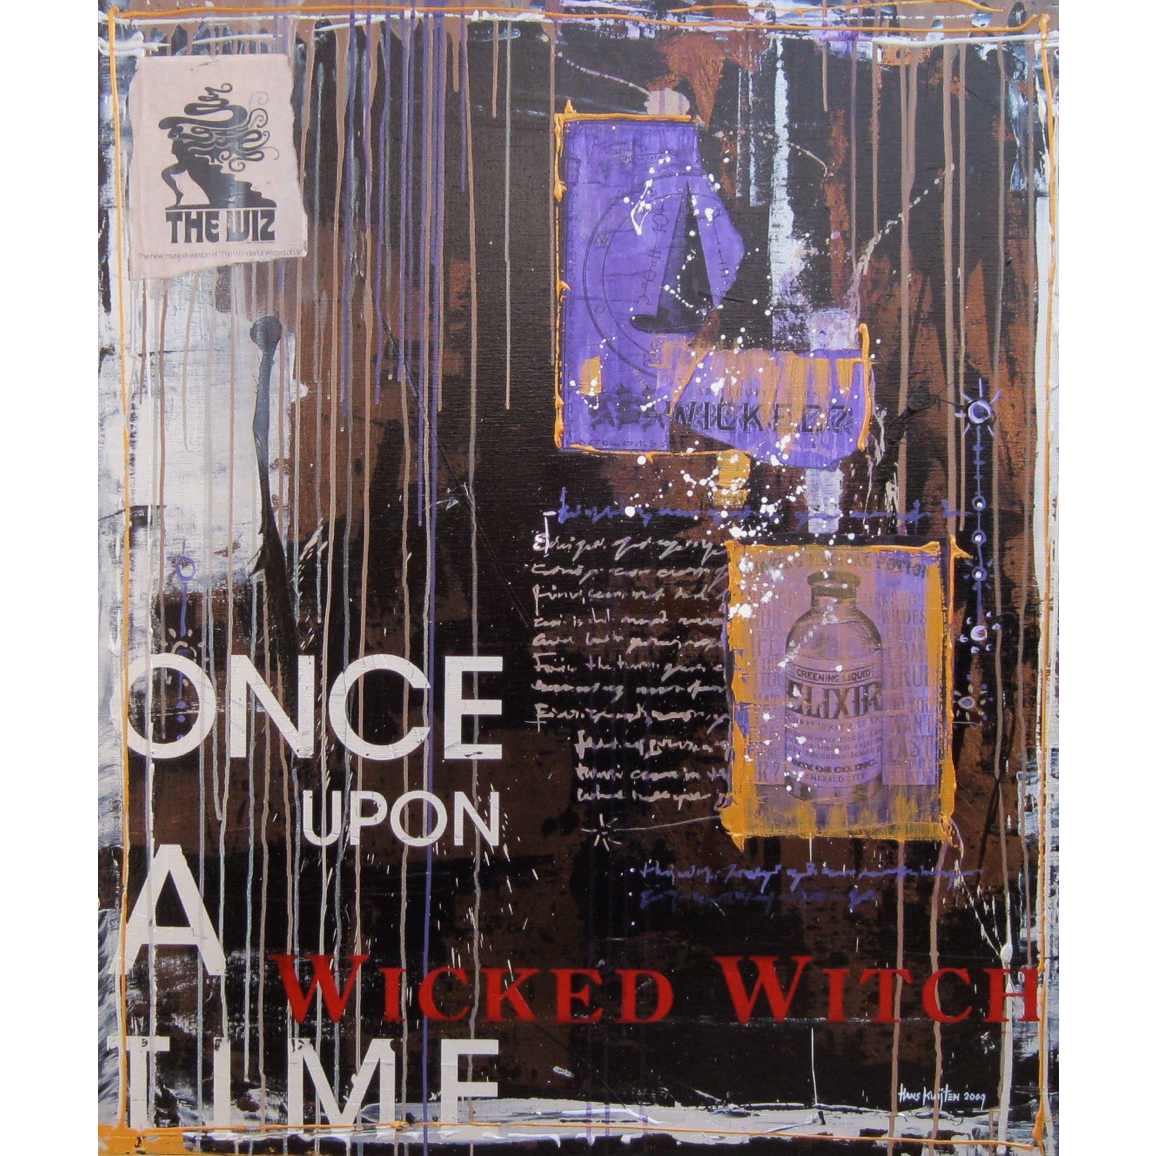 Art work once upon a time by Hans Kuijten